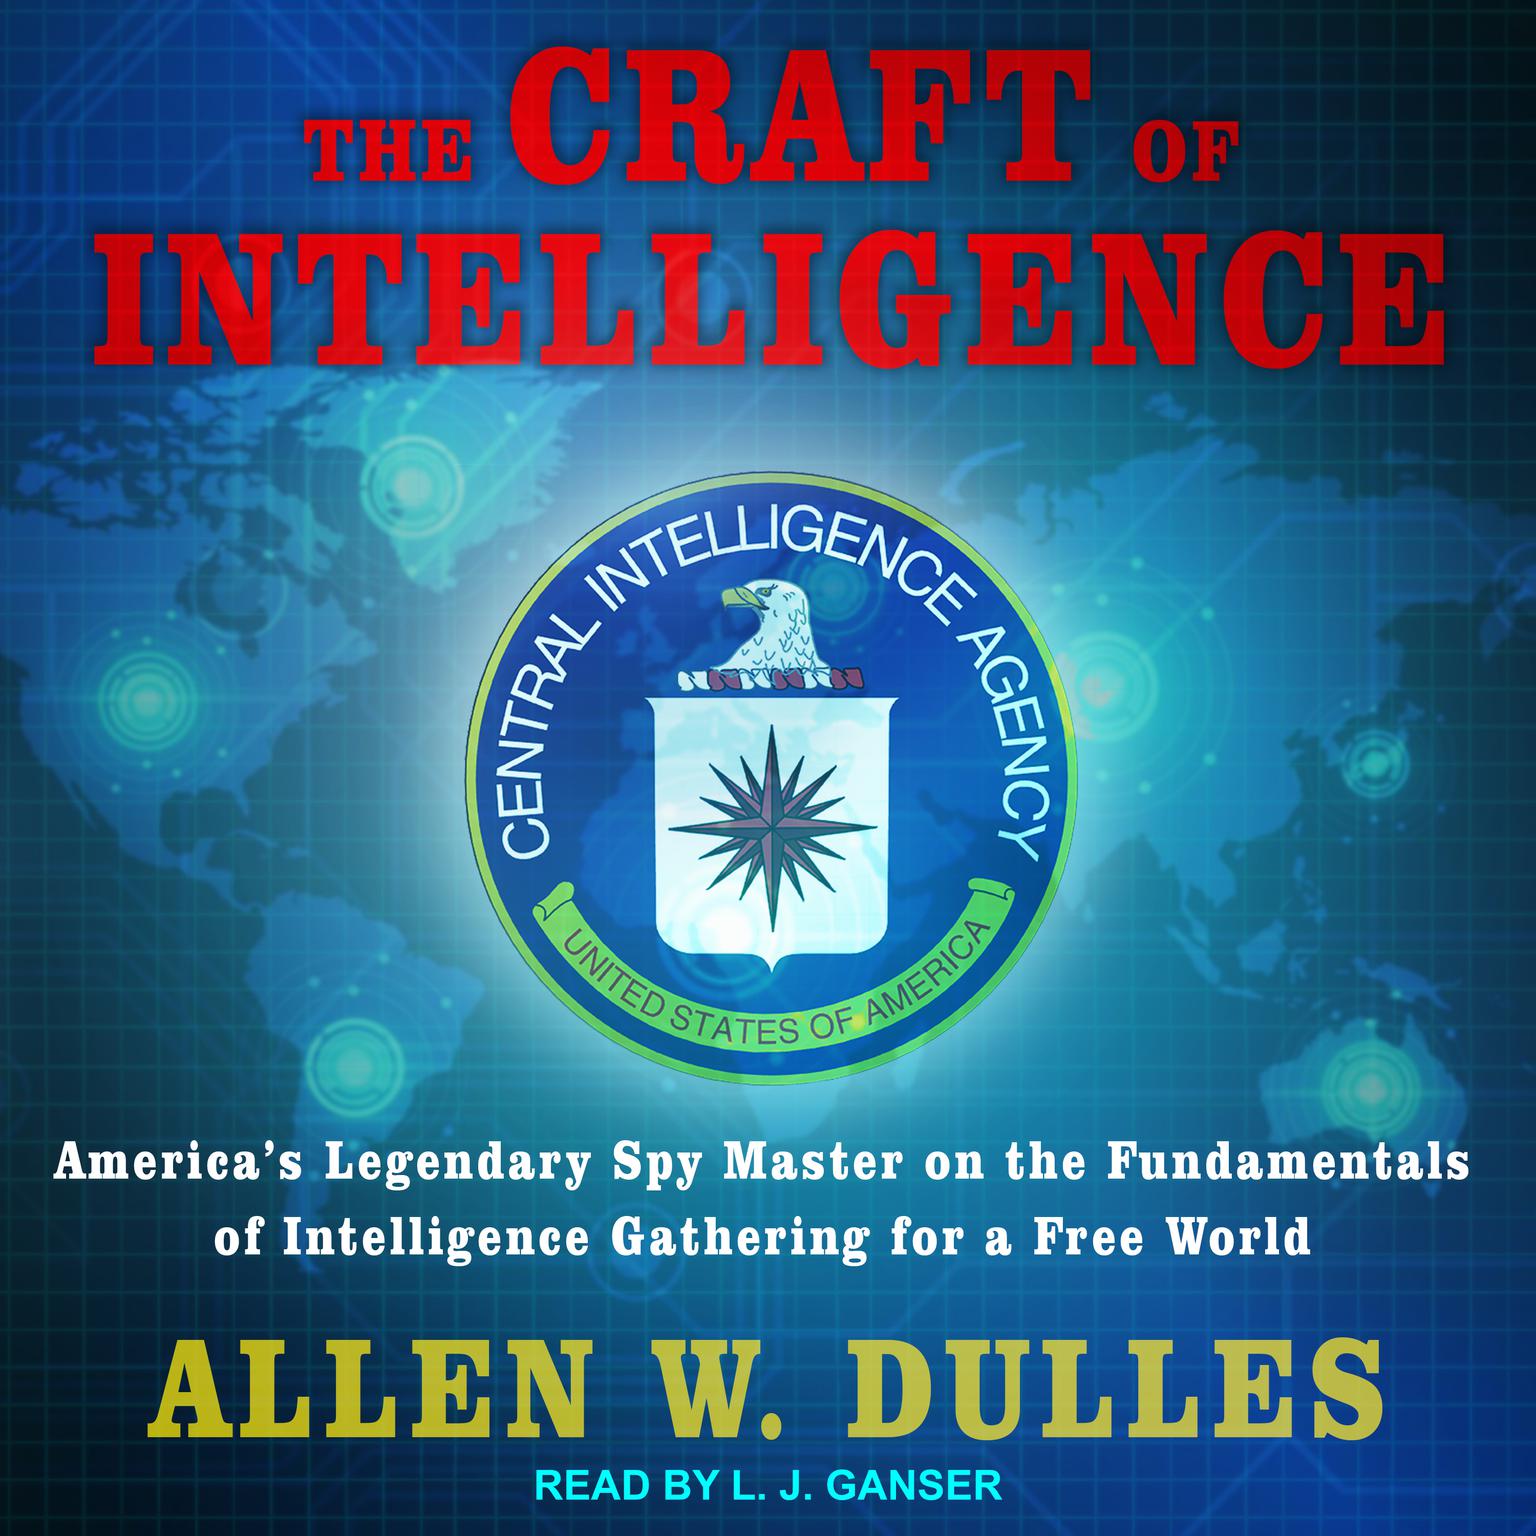 The Craft of Intelligence: Americas Legendary Spy Master on the Fundamentals of Intelligence Gathering for a Free World Audiobook, by Allen W. Dulles